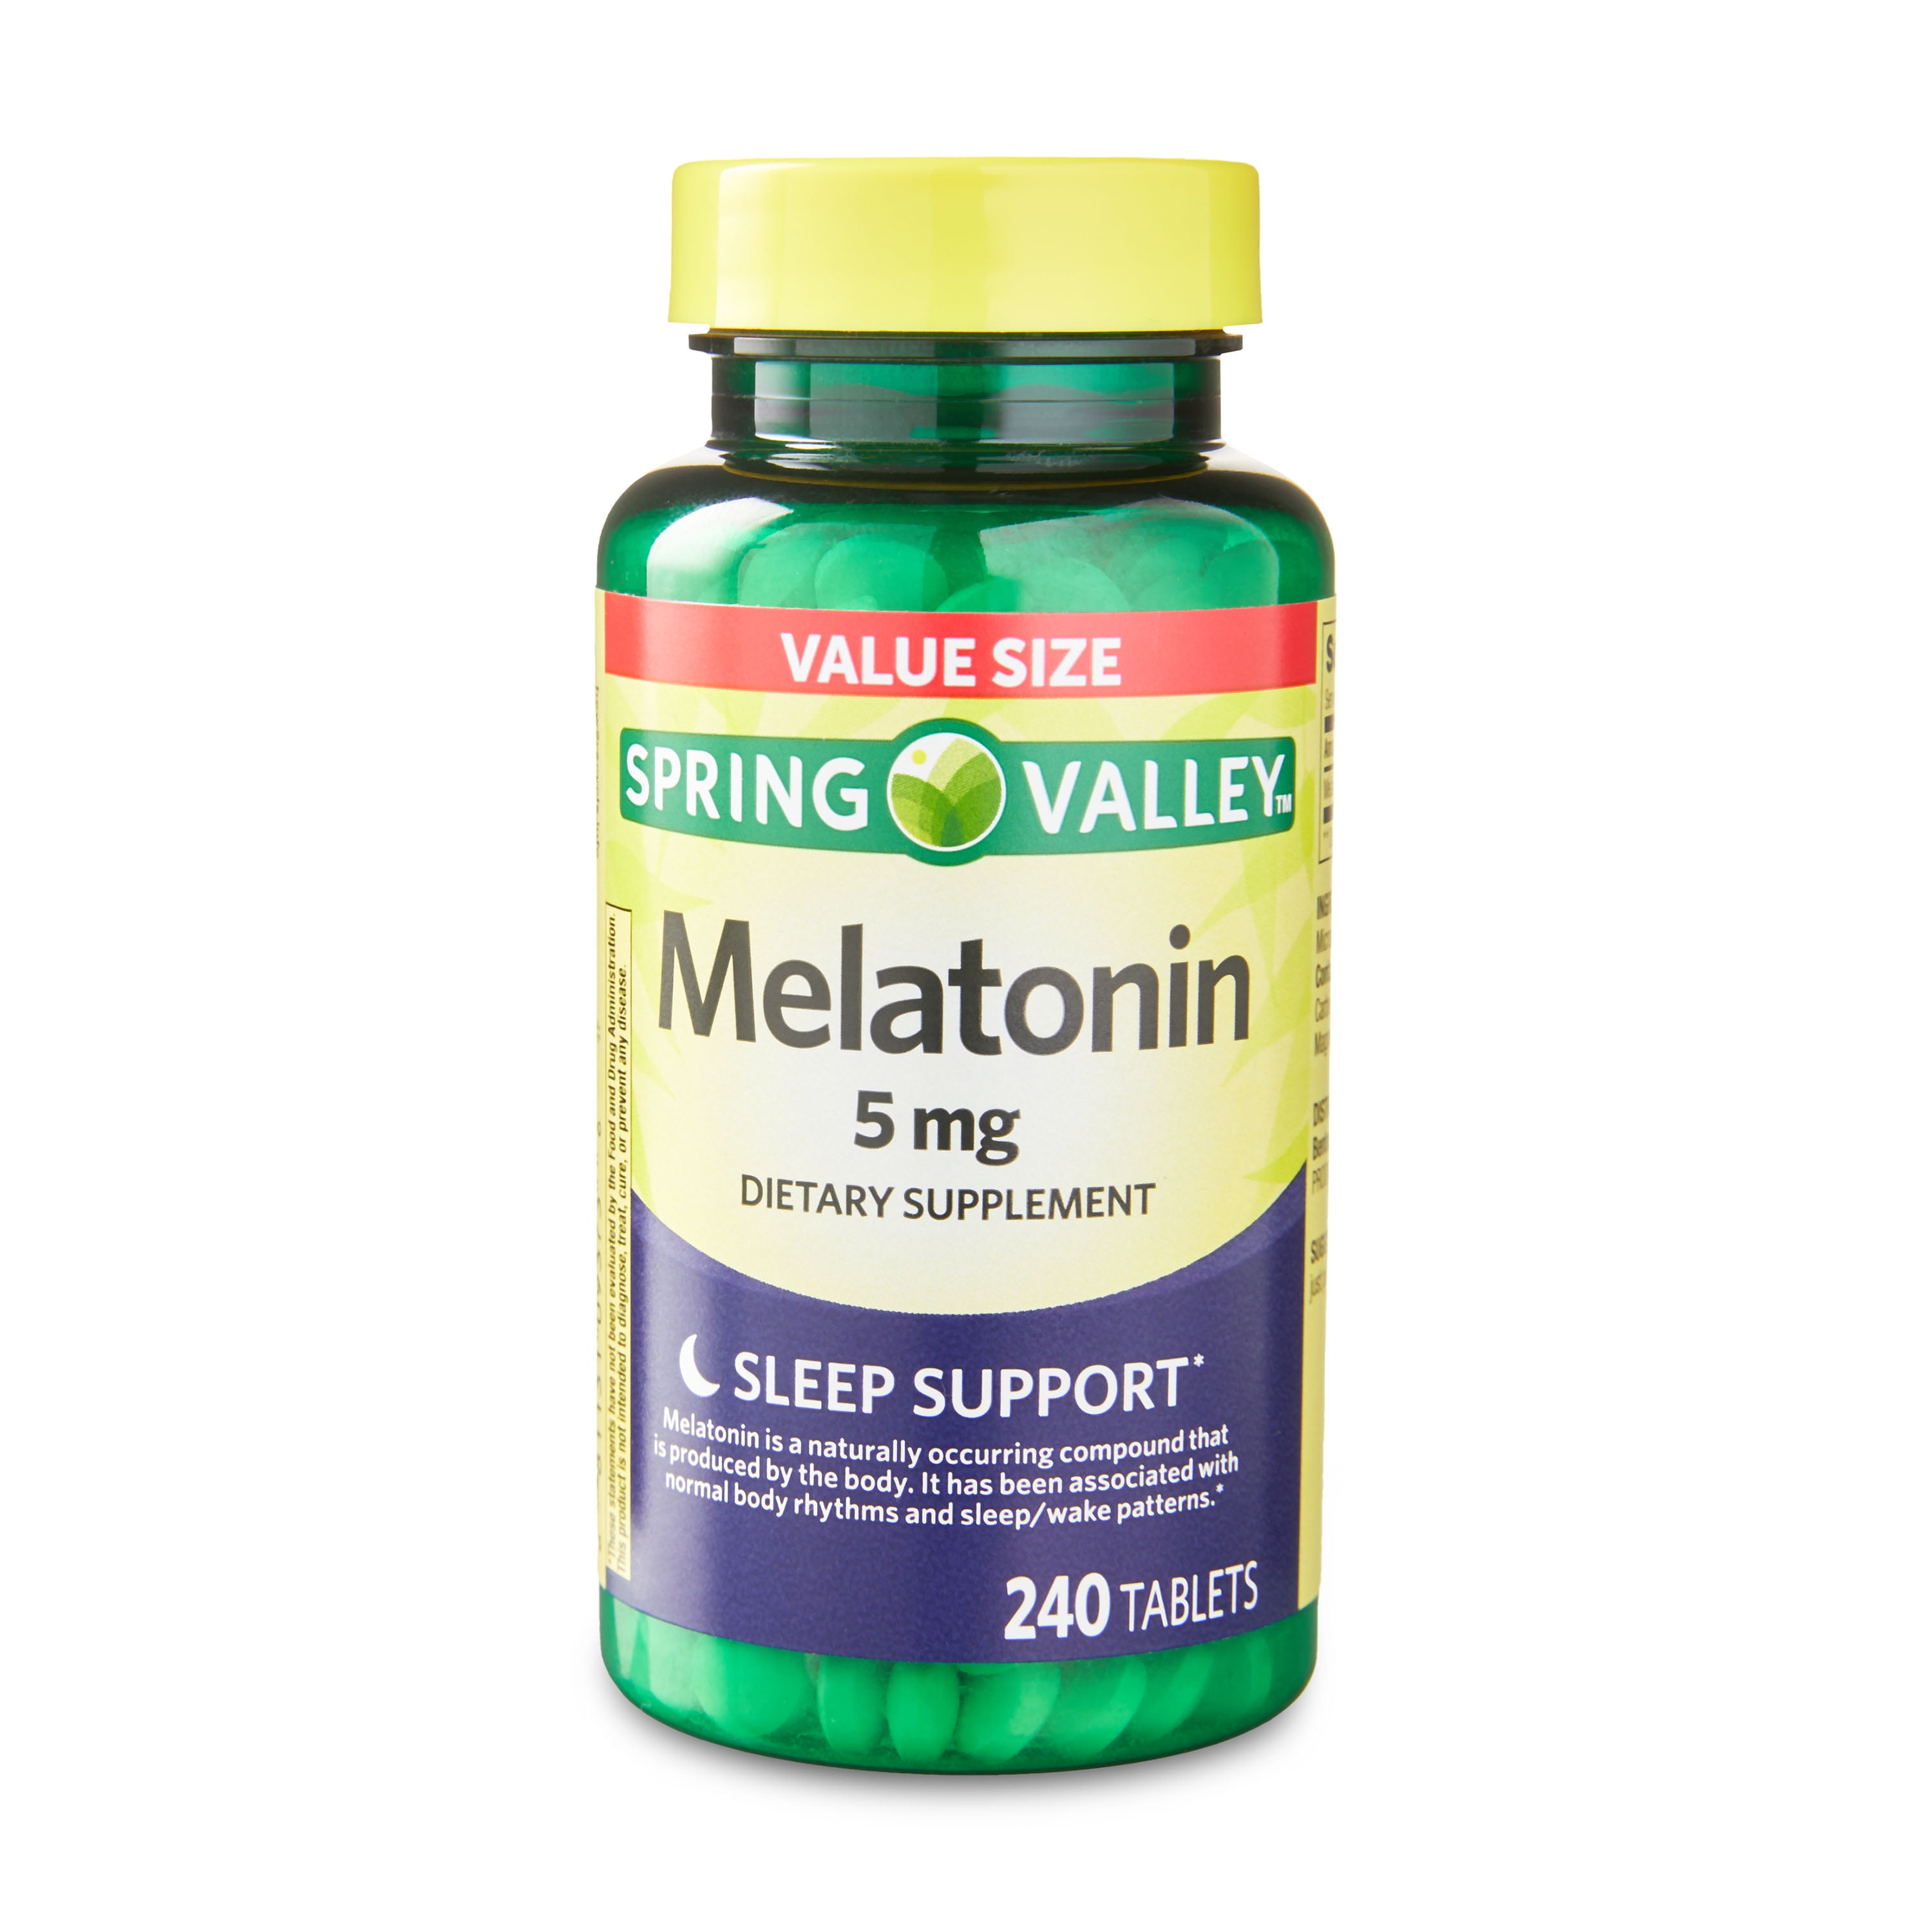 Spring Valley Melatonin Tablets Dietary Supplement Value Size, 5 mg, 240 Count